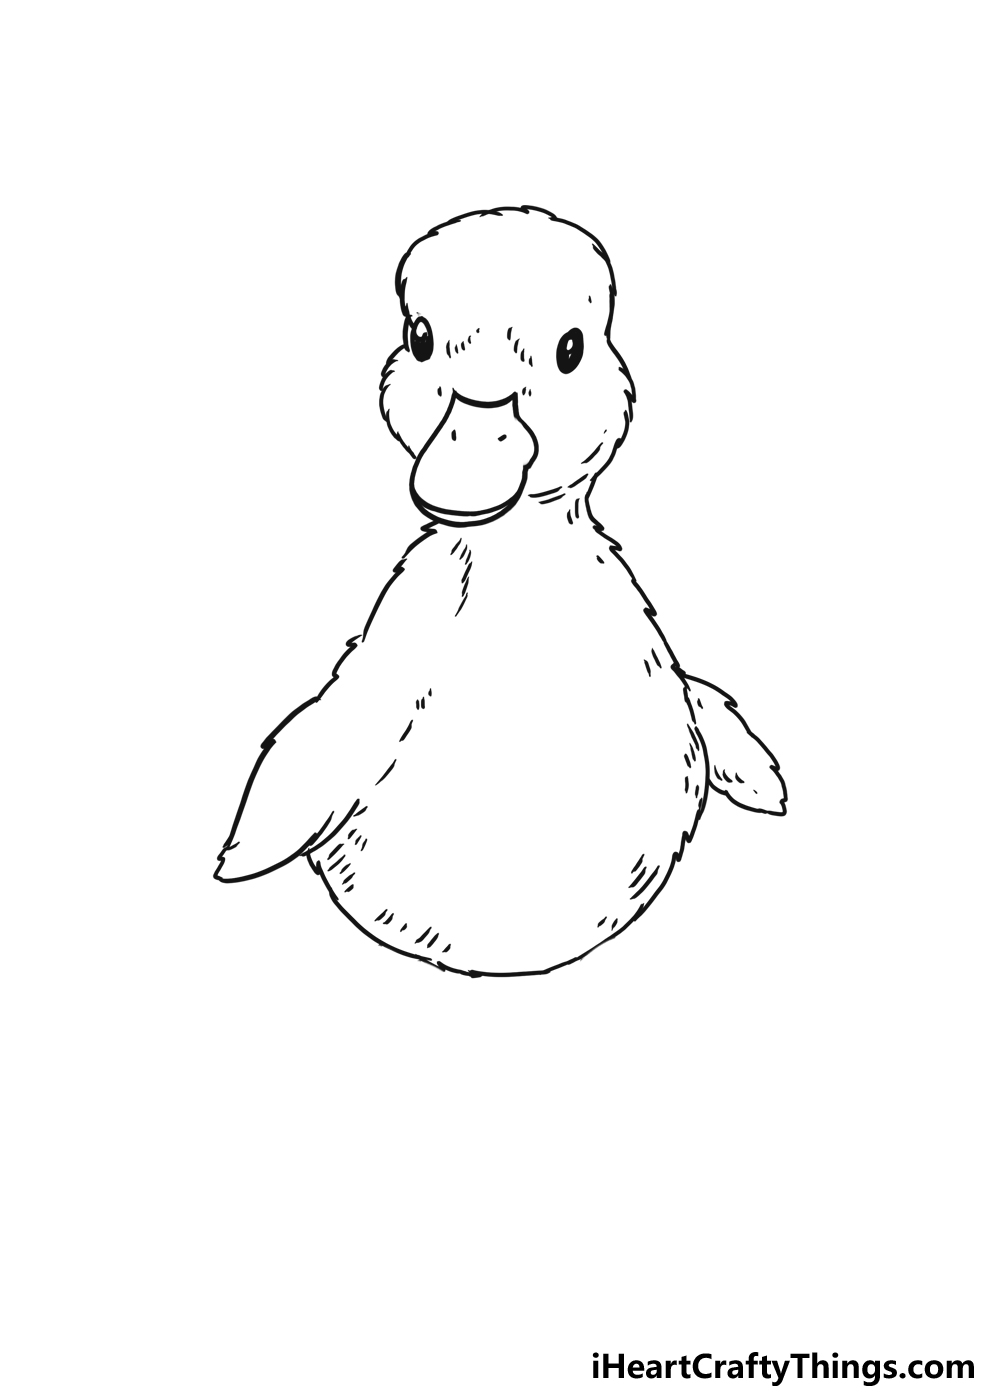 How to Draw A Cute Duckling step 4